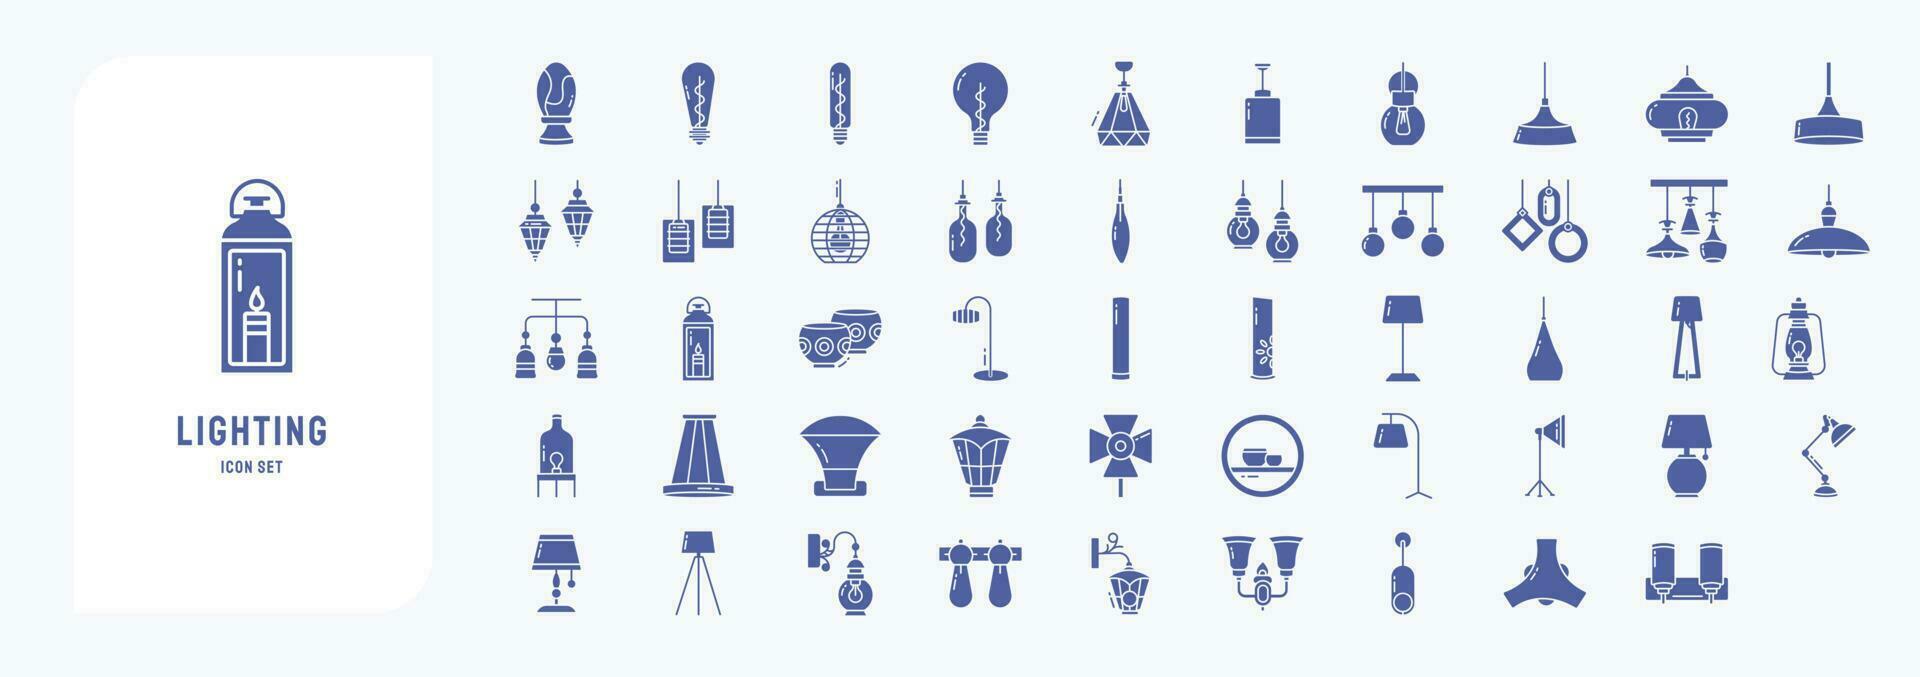 Lighting and bulb light, including icons like Bed lamp, Bulb, Decor Light and more vector